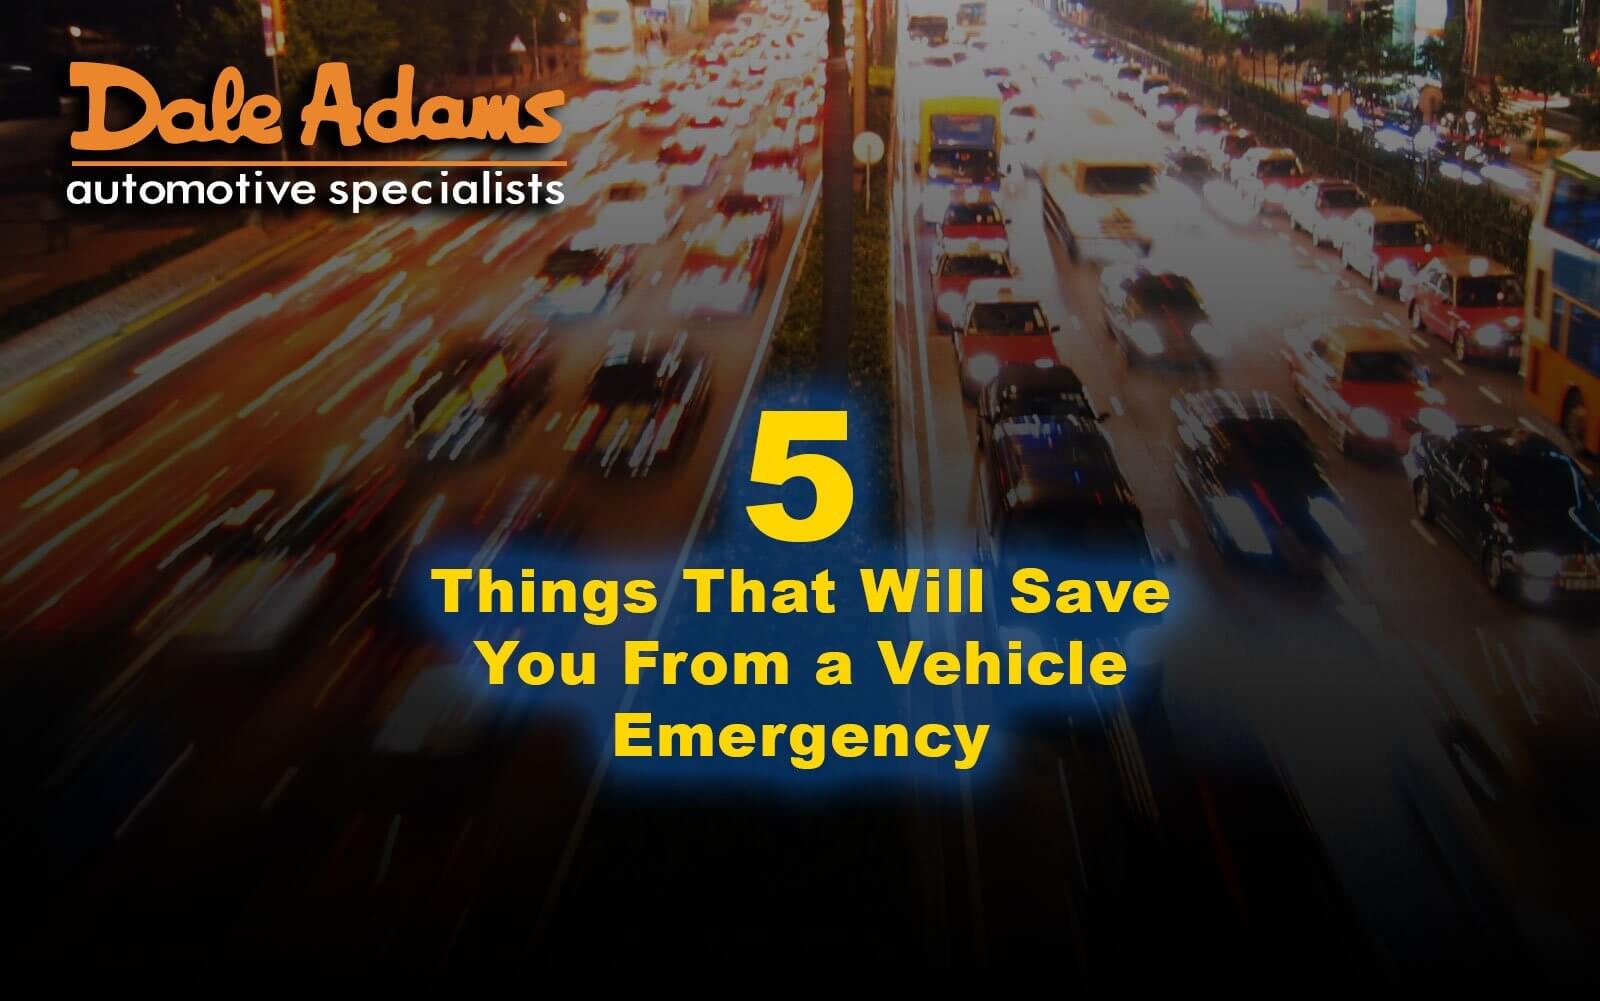 5 THINGS THAT WILL SAVE YOU FROM A VEHICLE EMERGENCY